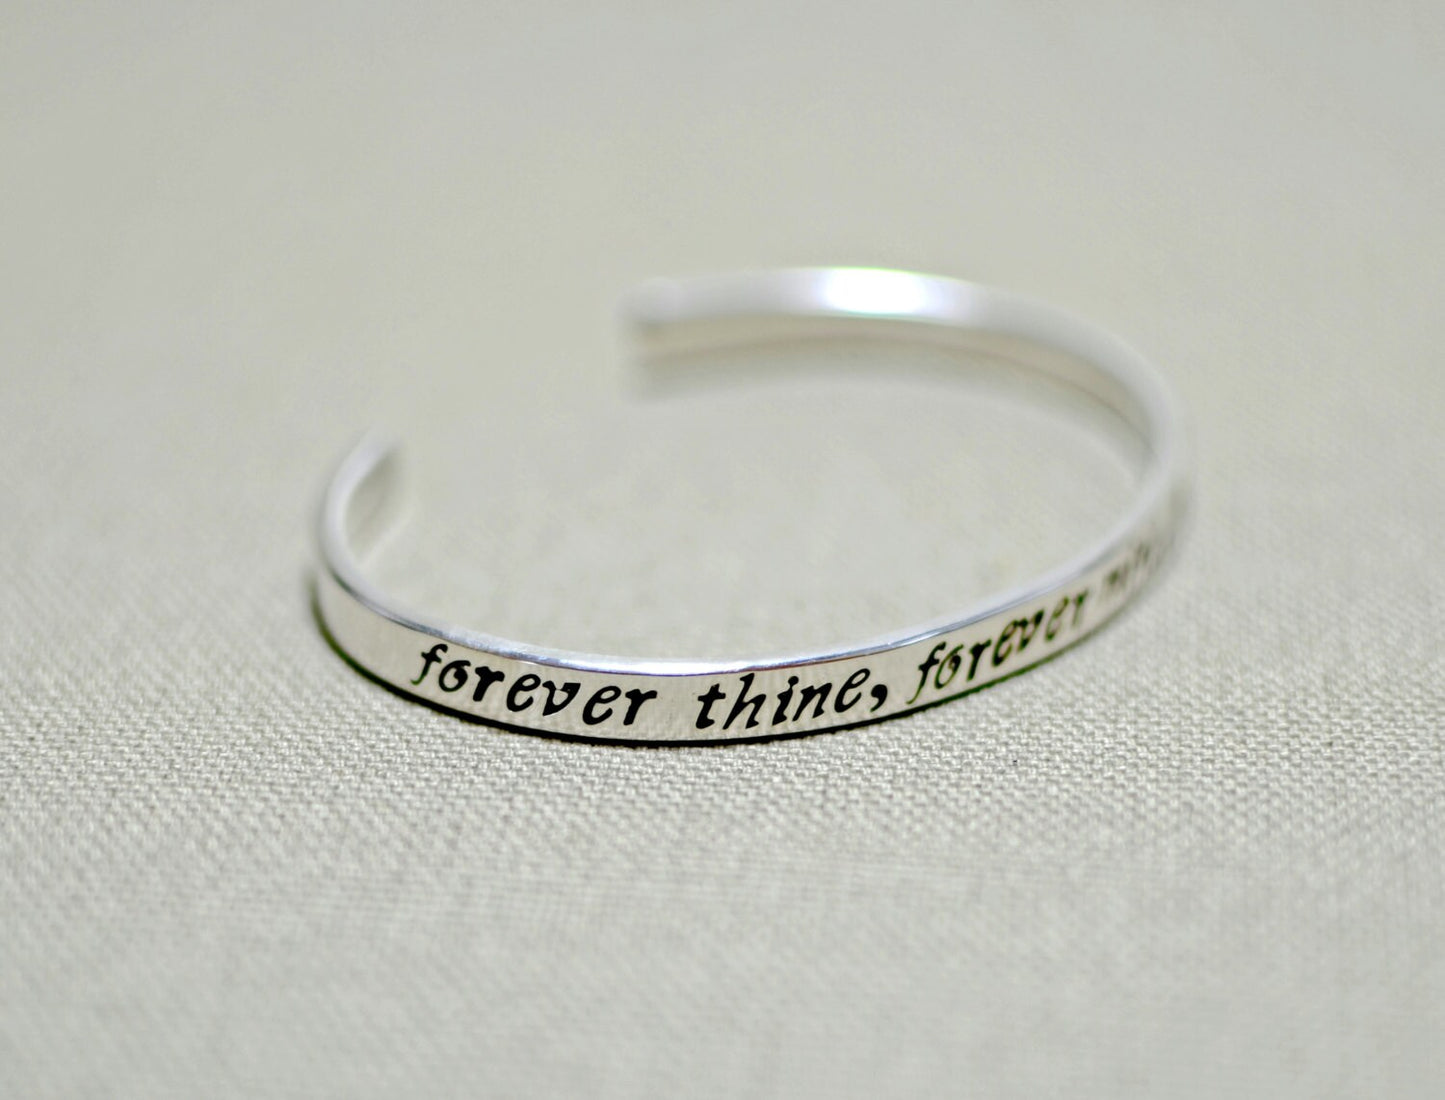 Forever thine forever mine forever ours on polished sterling silver cuff bracelet